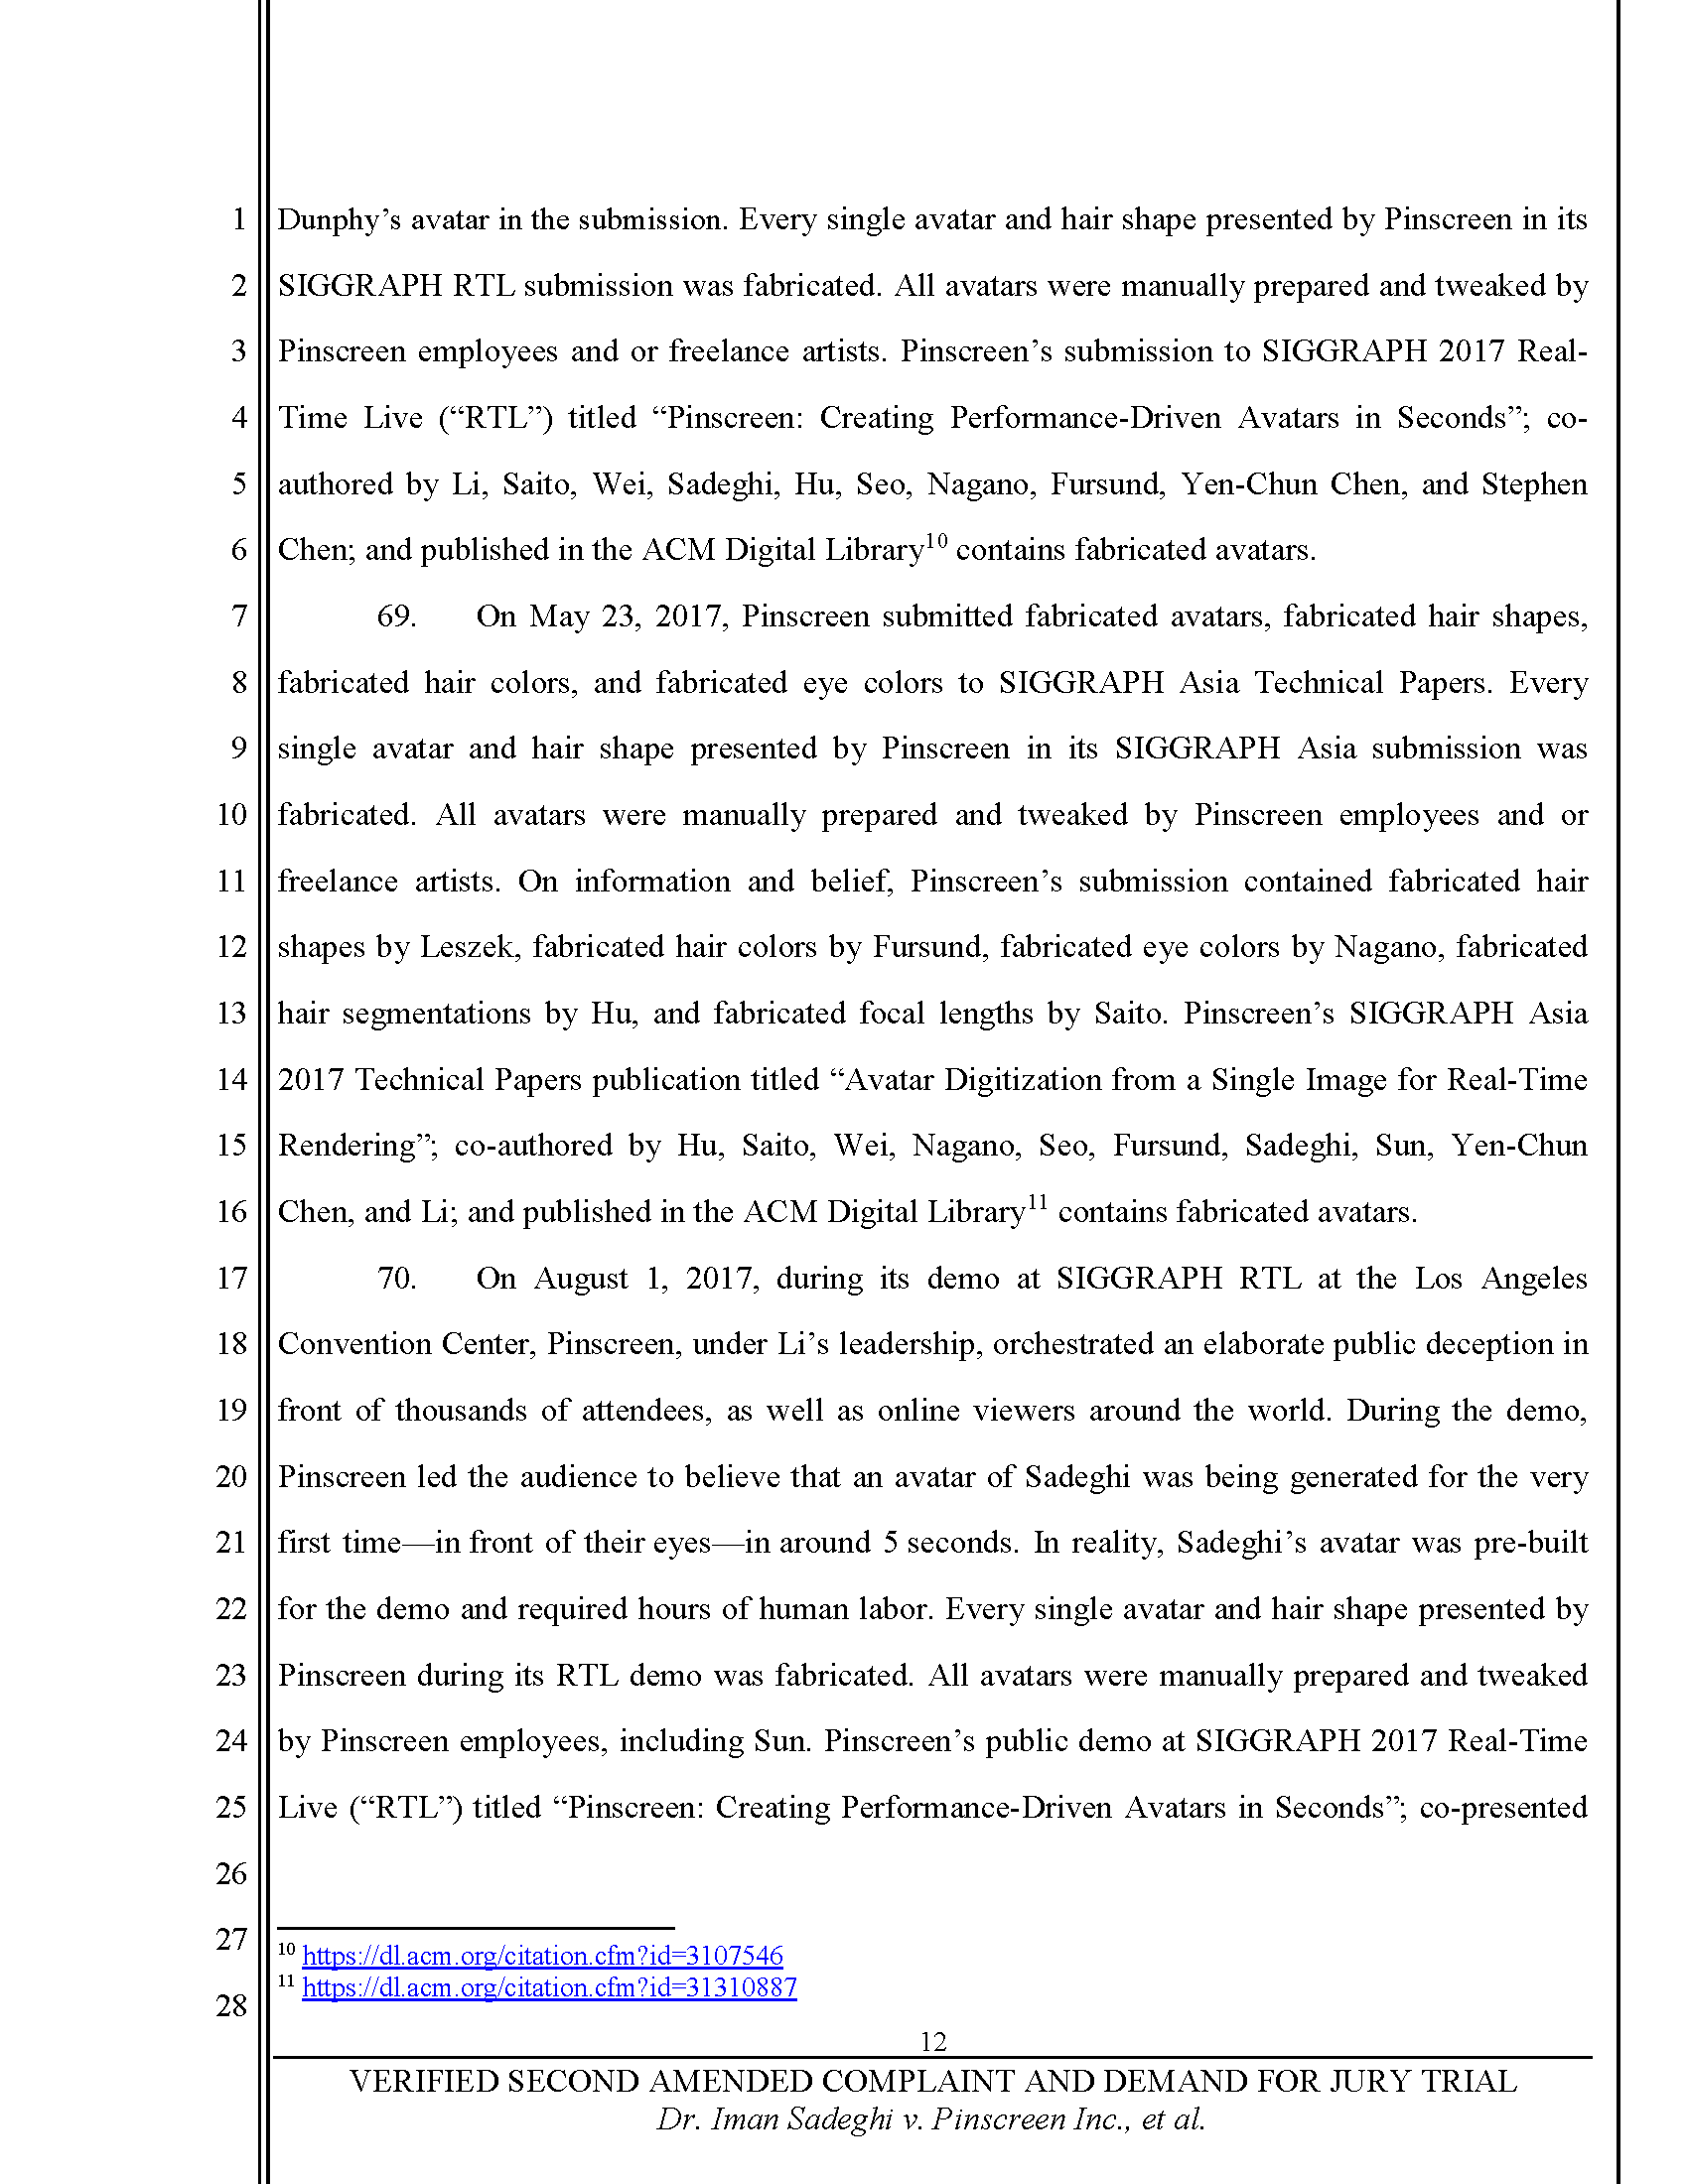 Second Amended Complaint (SAC) Page 13